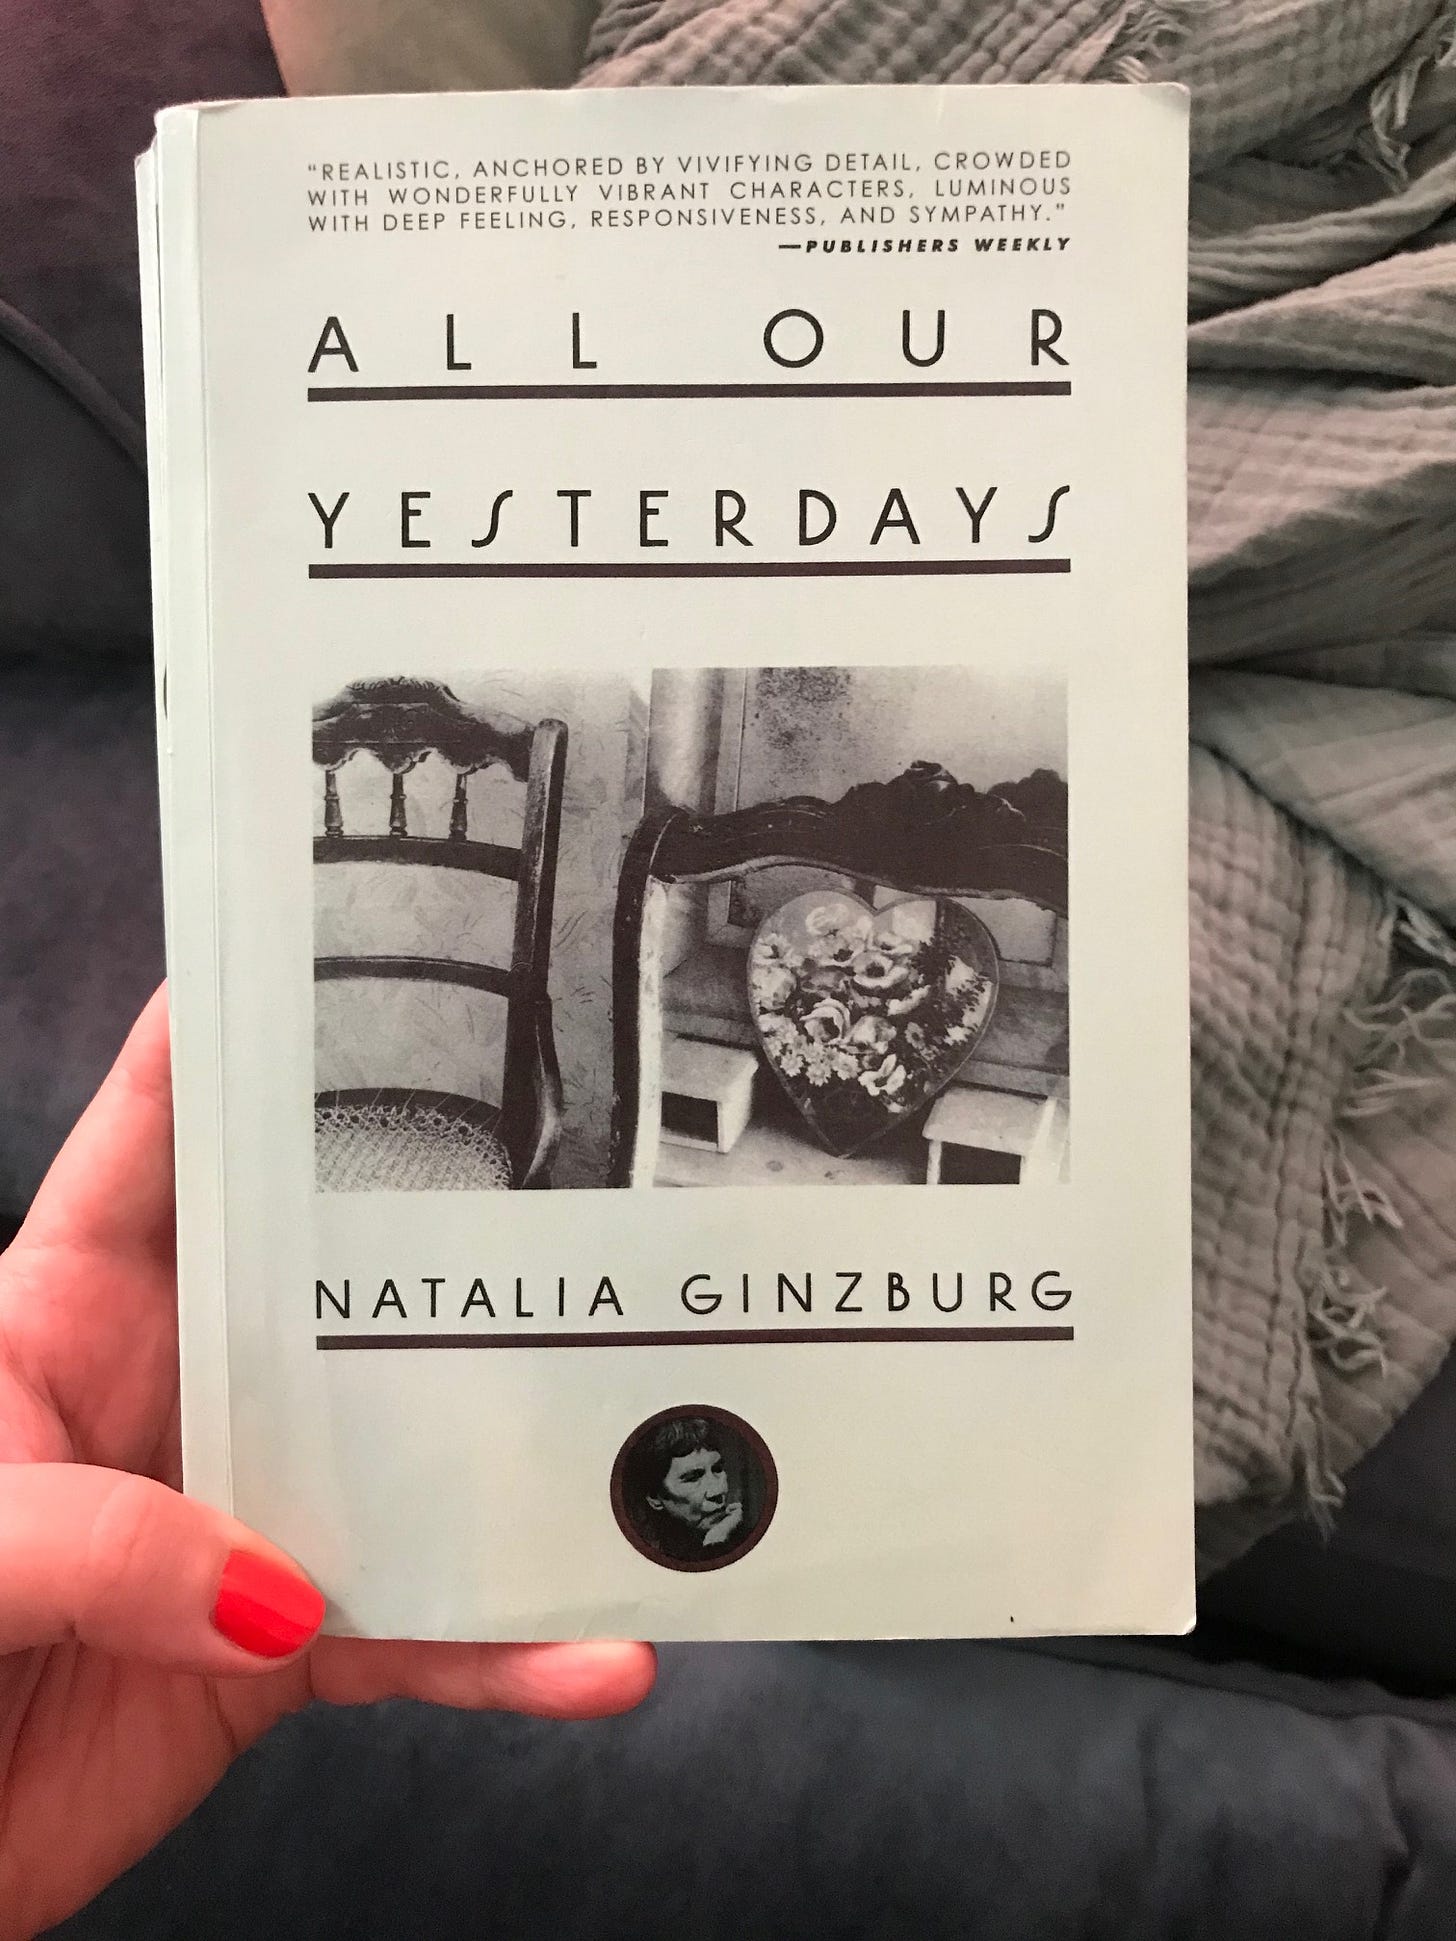 Hand holding a book called All Our Yesterdays by Natalia Ginzburg, with blue blanket and chair in background